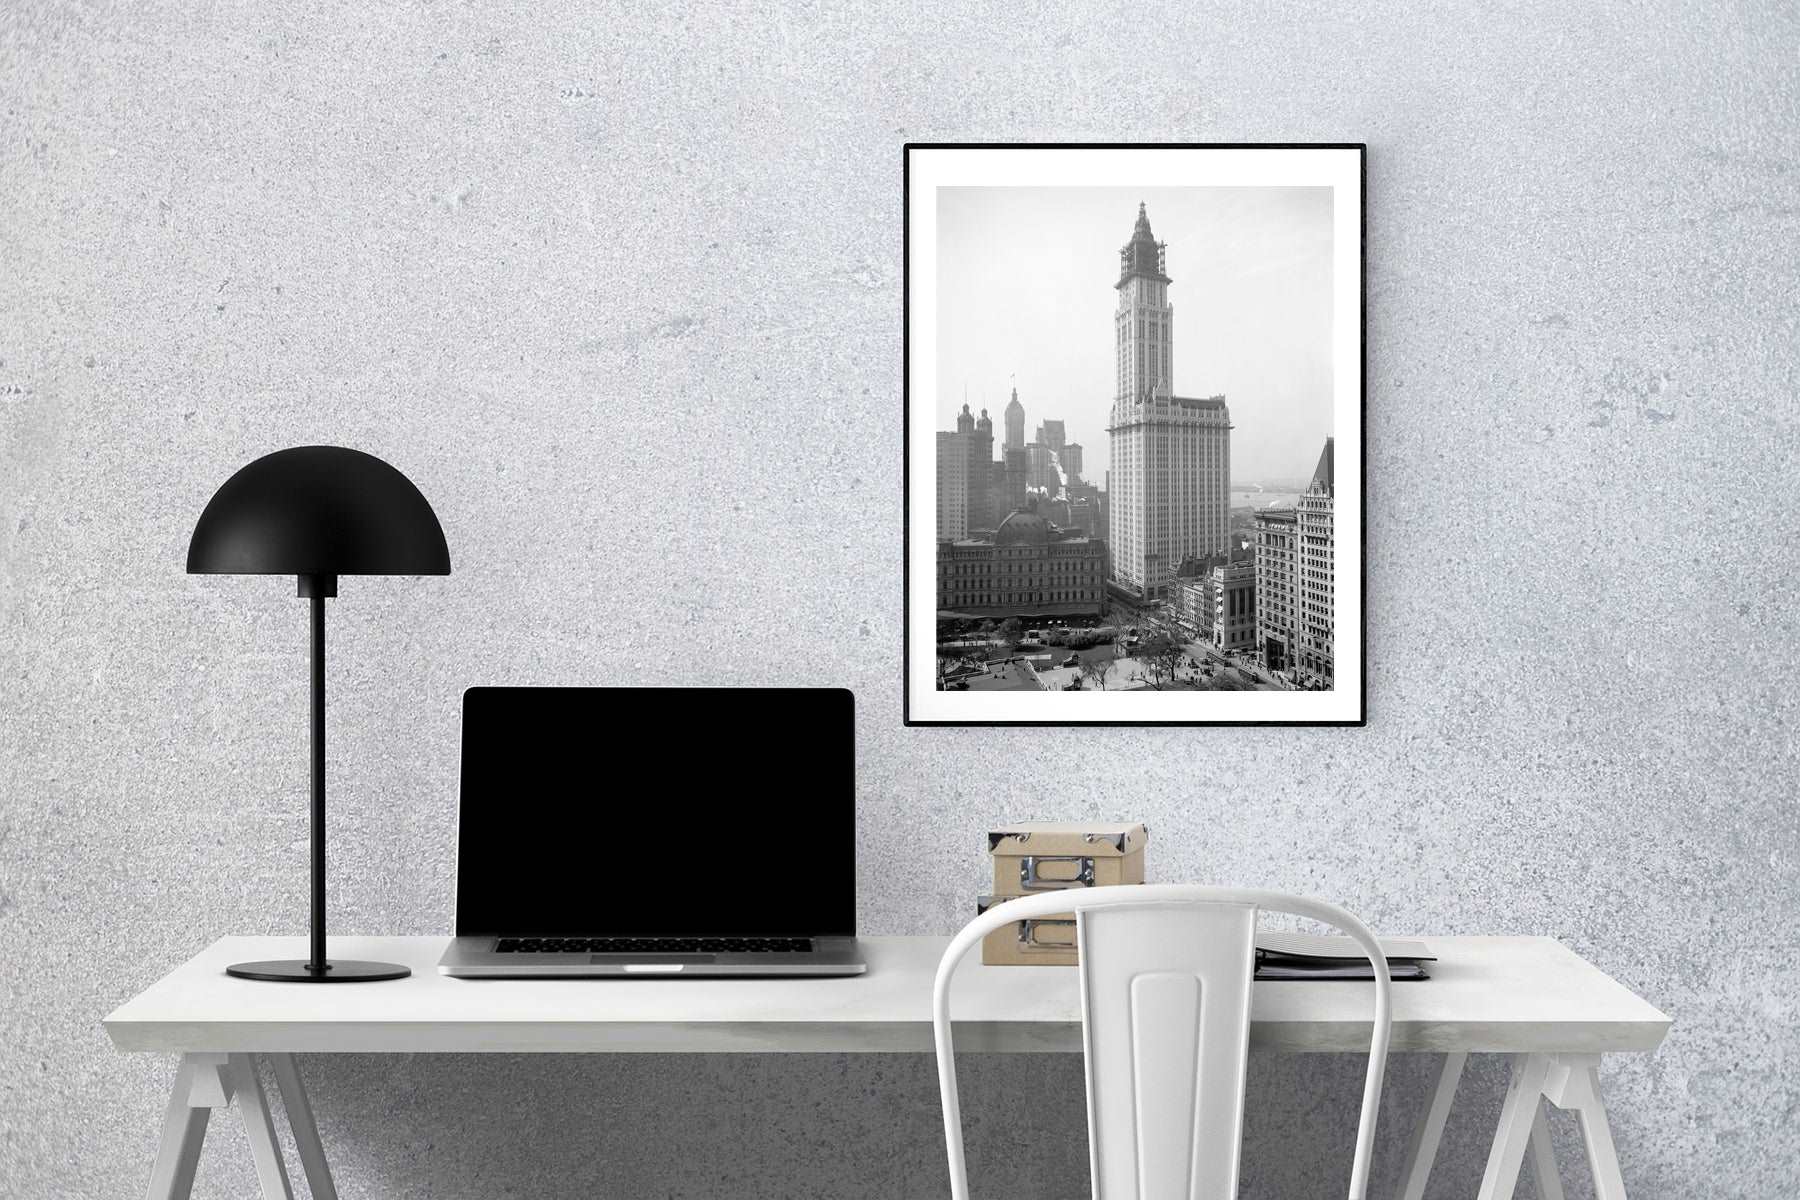 A framed print of the Woolworth Building in New York City, printed on paper and hanging above a desk